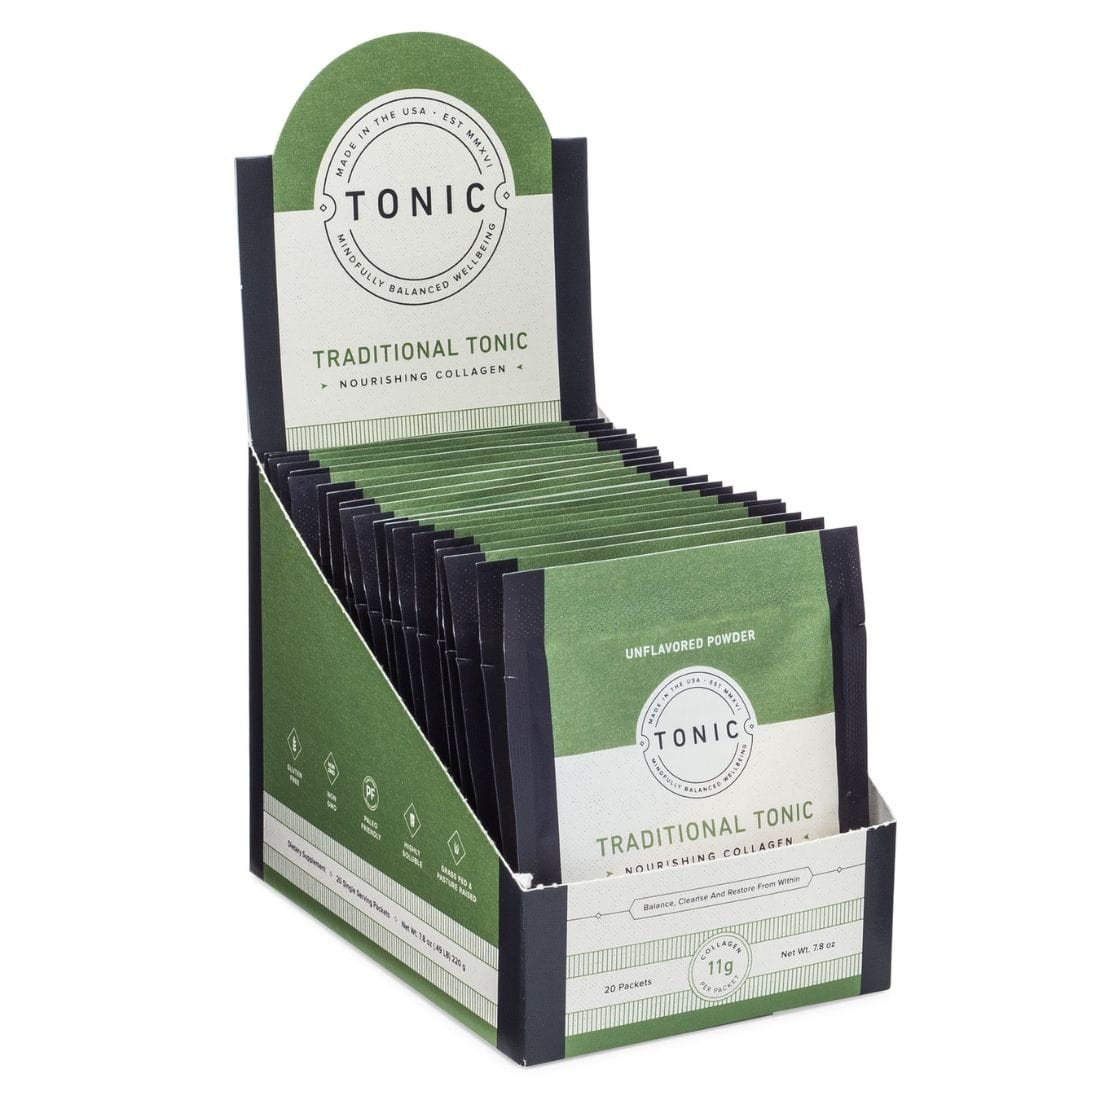 Tonic Products Traditional Tonic (Nourishing Collagen)